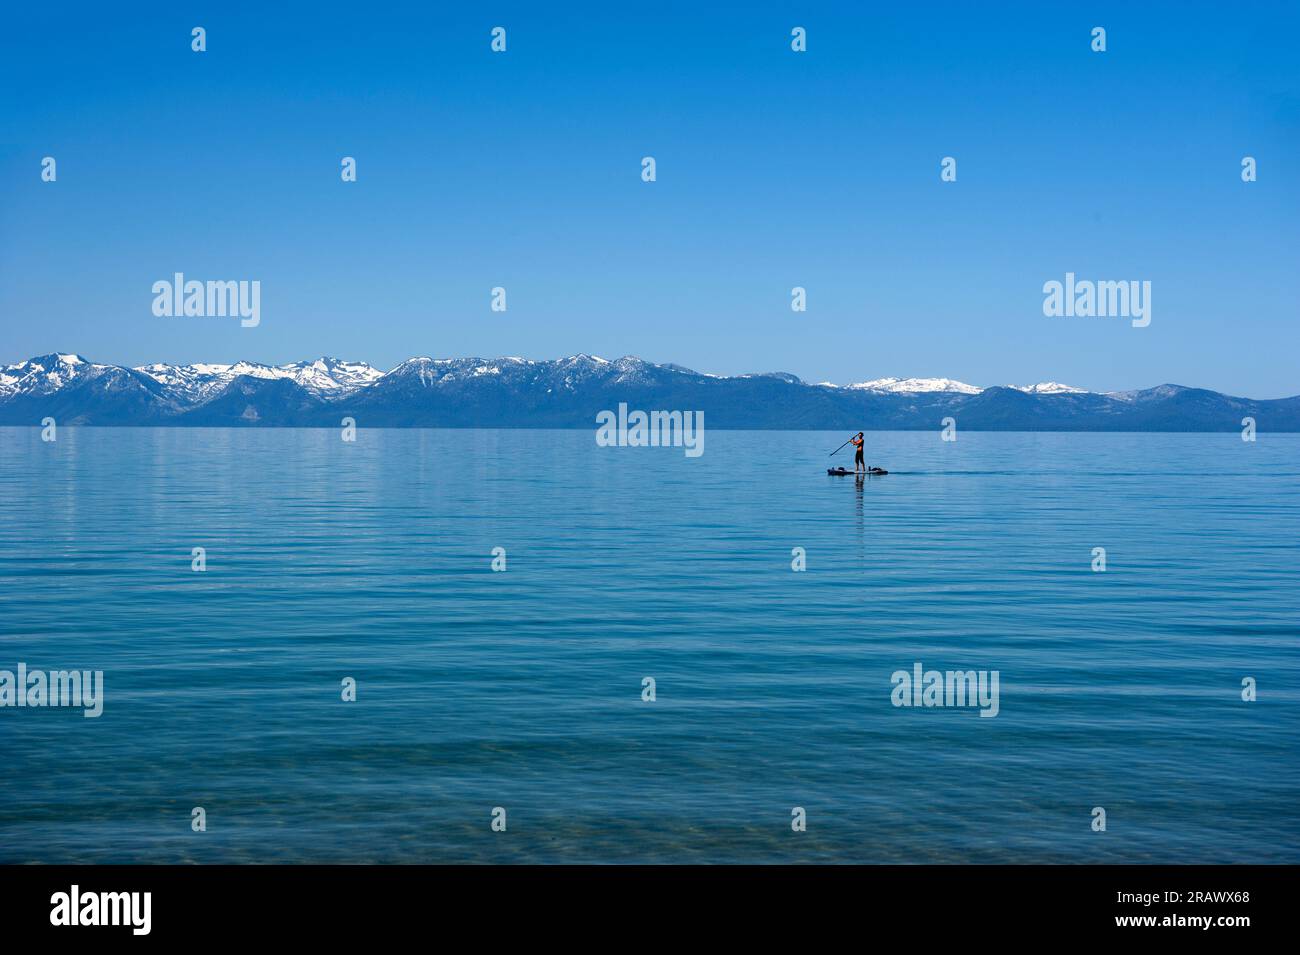 A man on a paddle board at Sand Harbor in Lake Tahoe, California Stock Photo